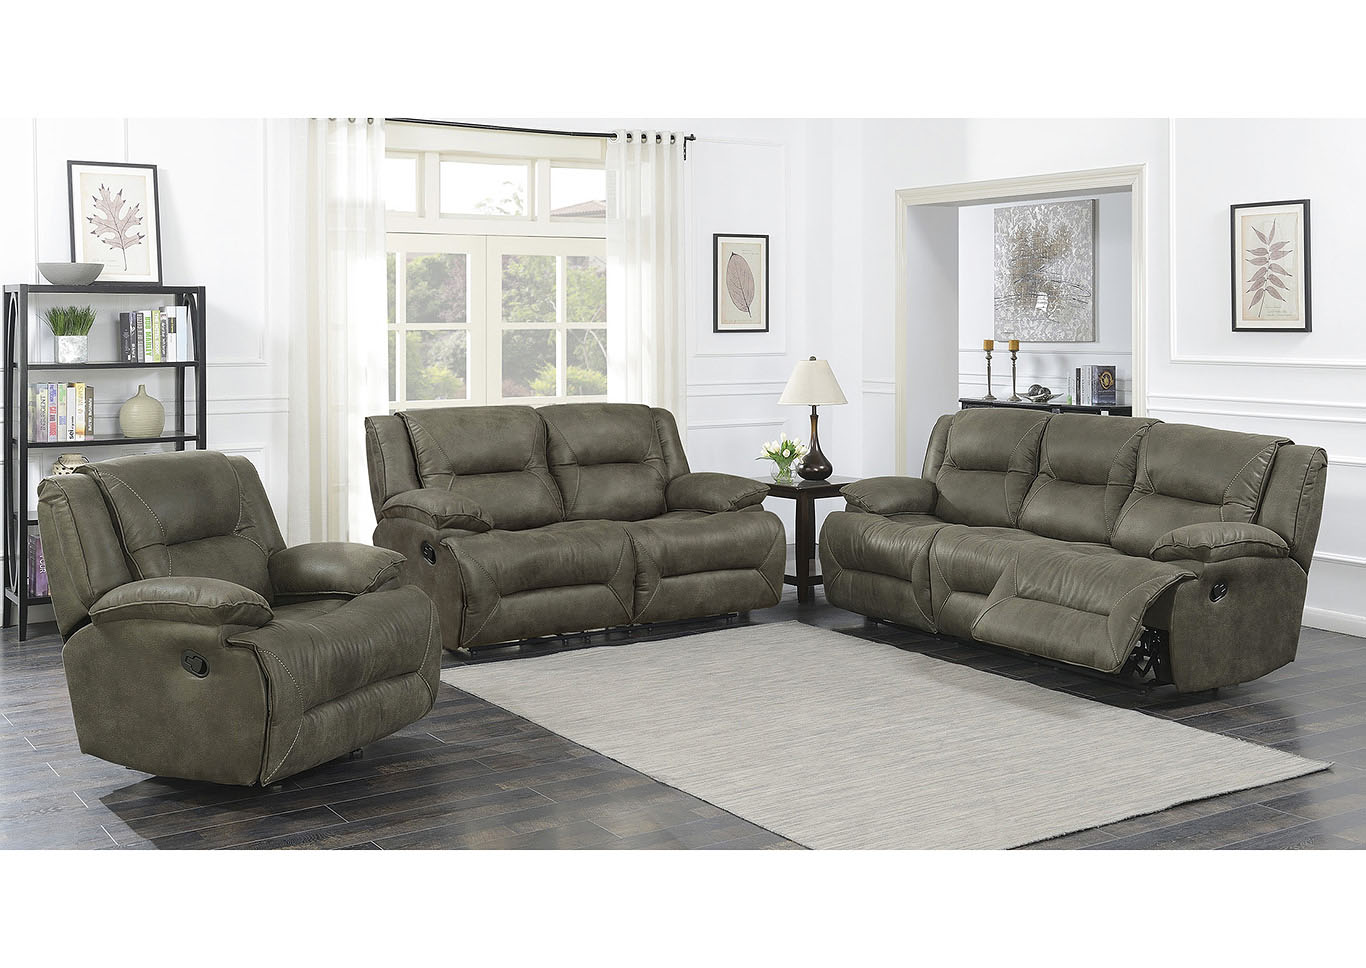 Hannah Gray Manual Motion 3 Piece Living Room Set Best Buy Furniture And Mattress